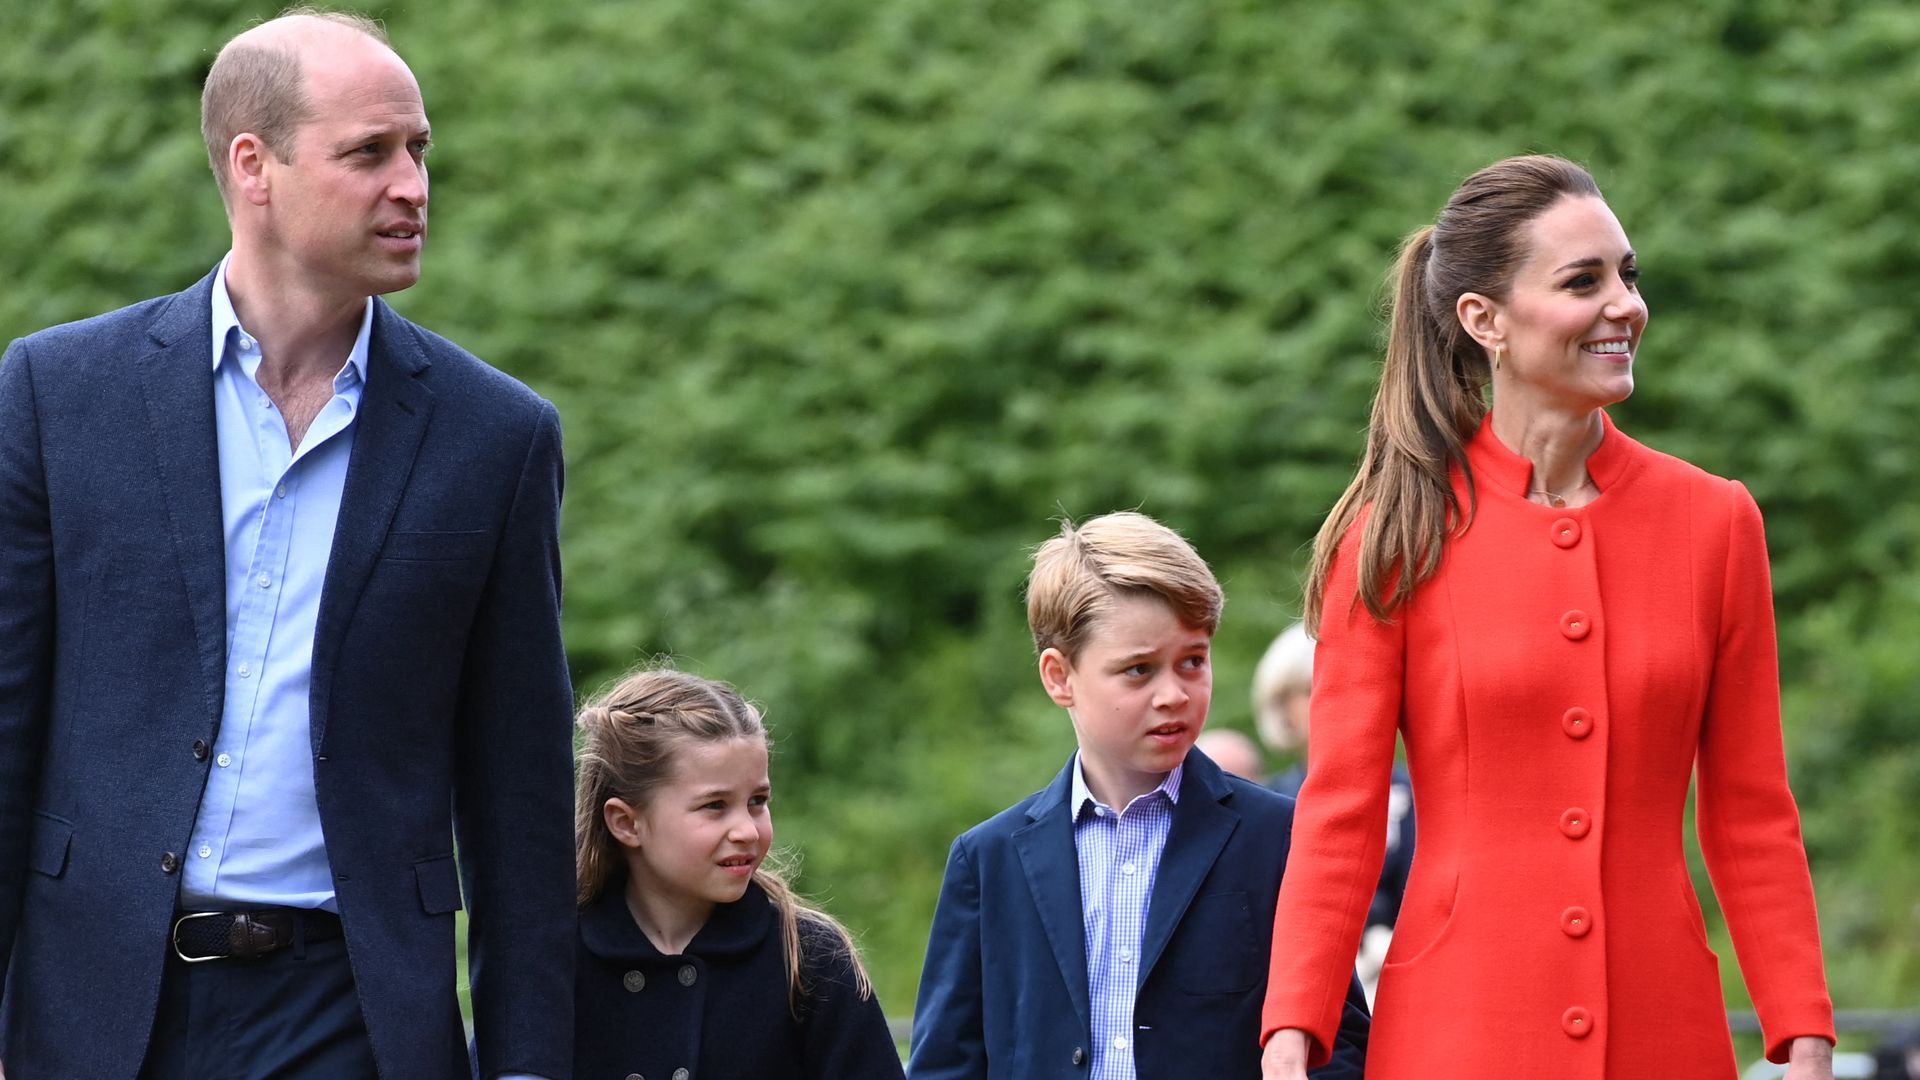 Princess Kate and Prince William's strict parenting ban to 'empower' George, Charlotte and Louis